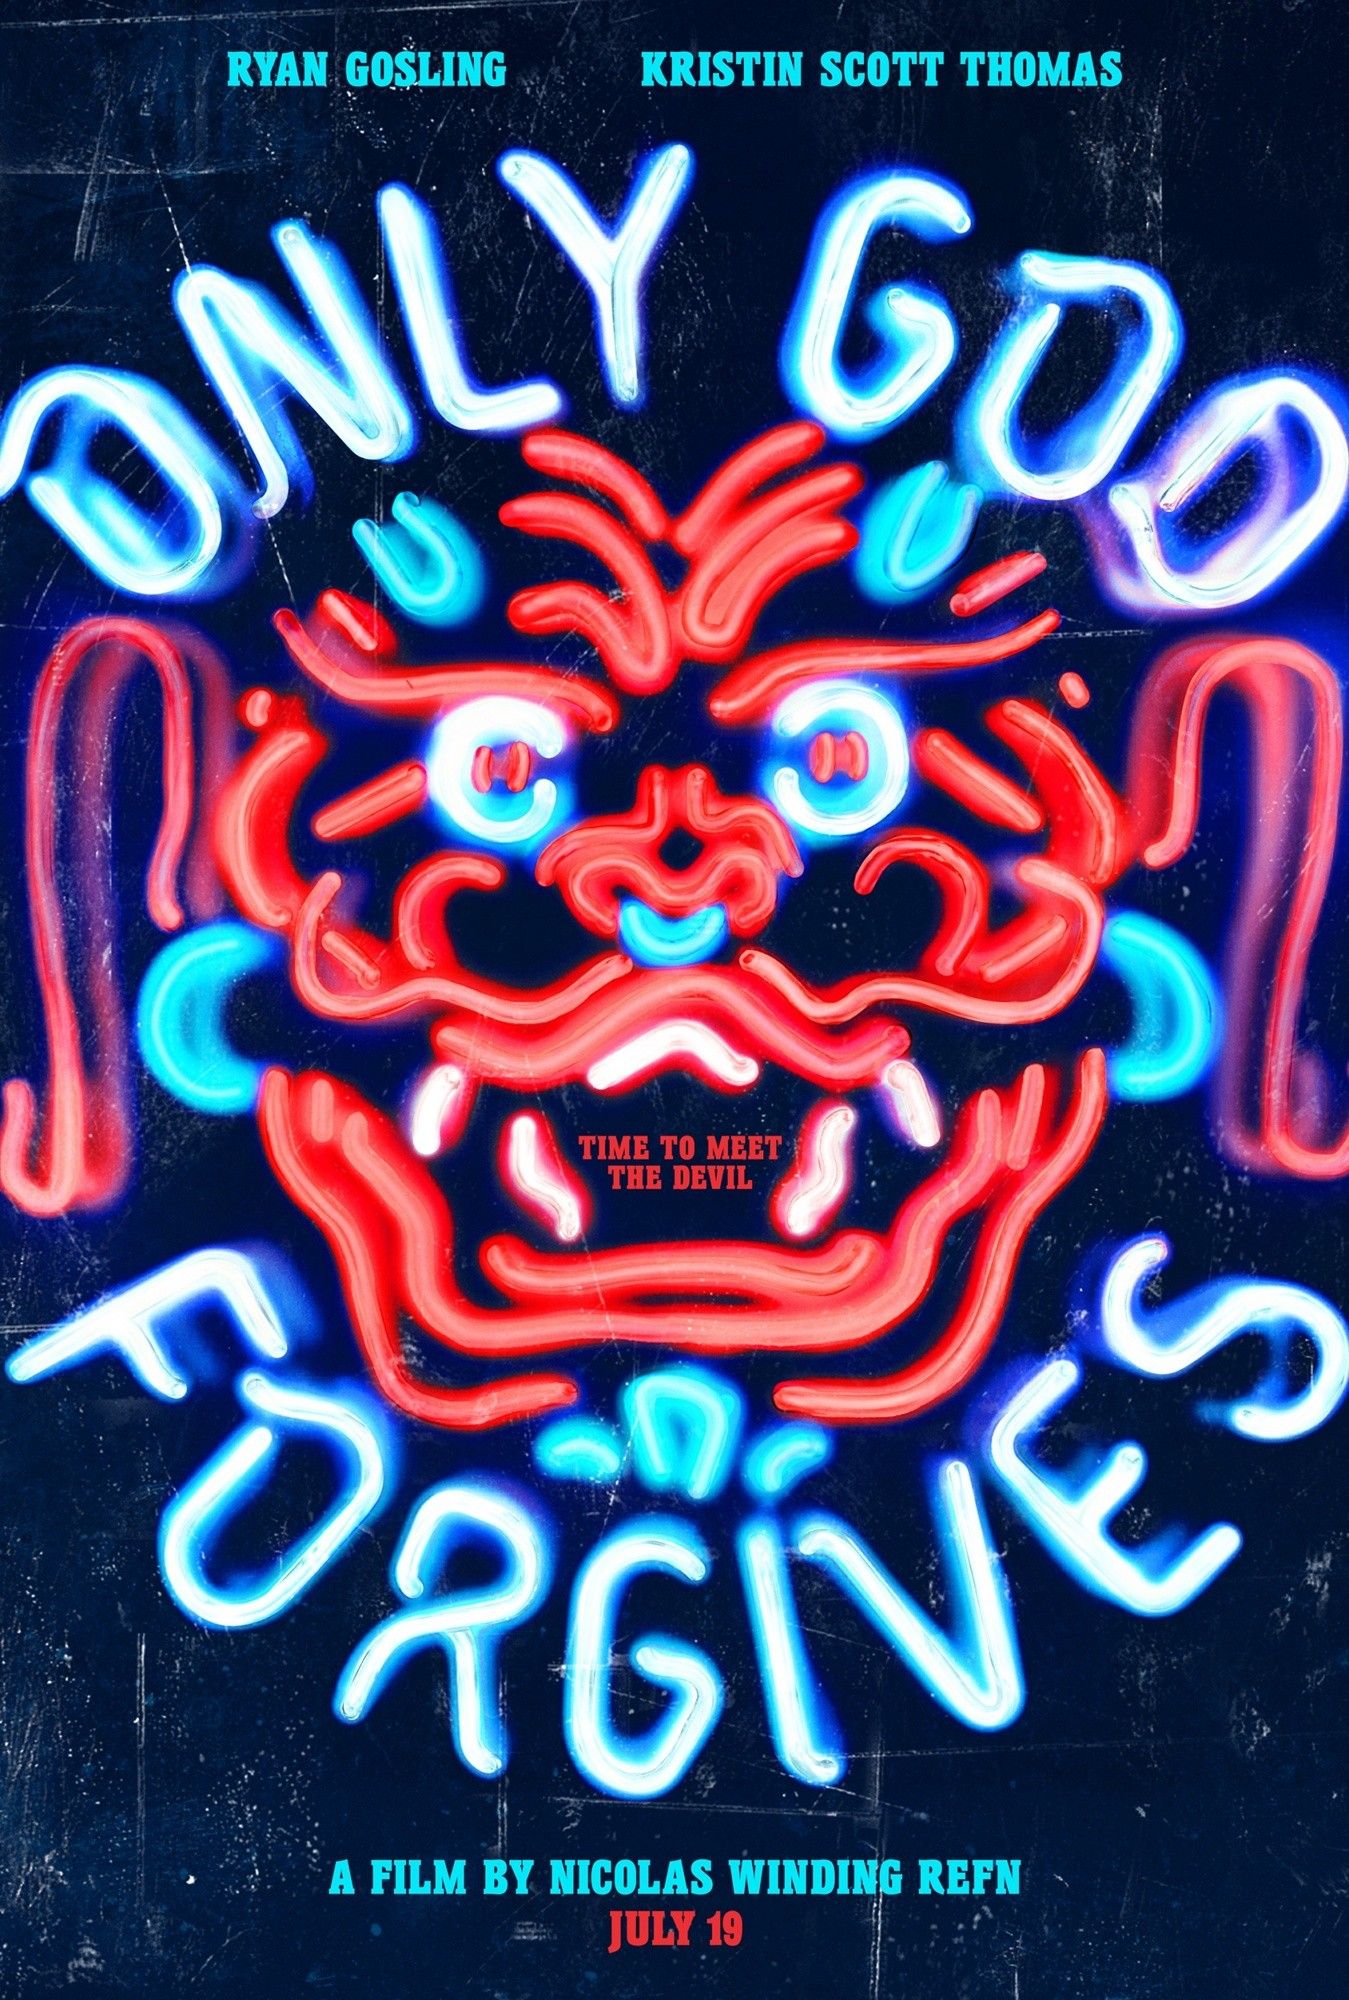 Poster of RADiUS-TWC's Only God Forgives (2013)